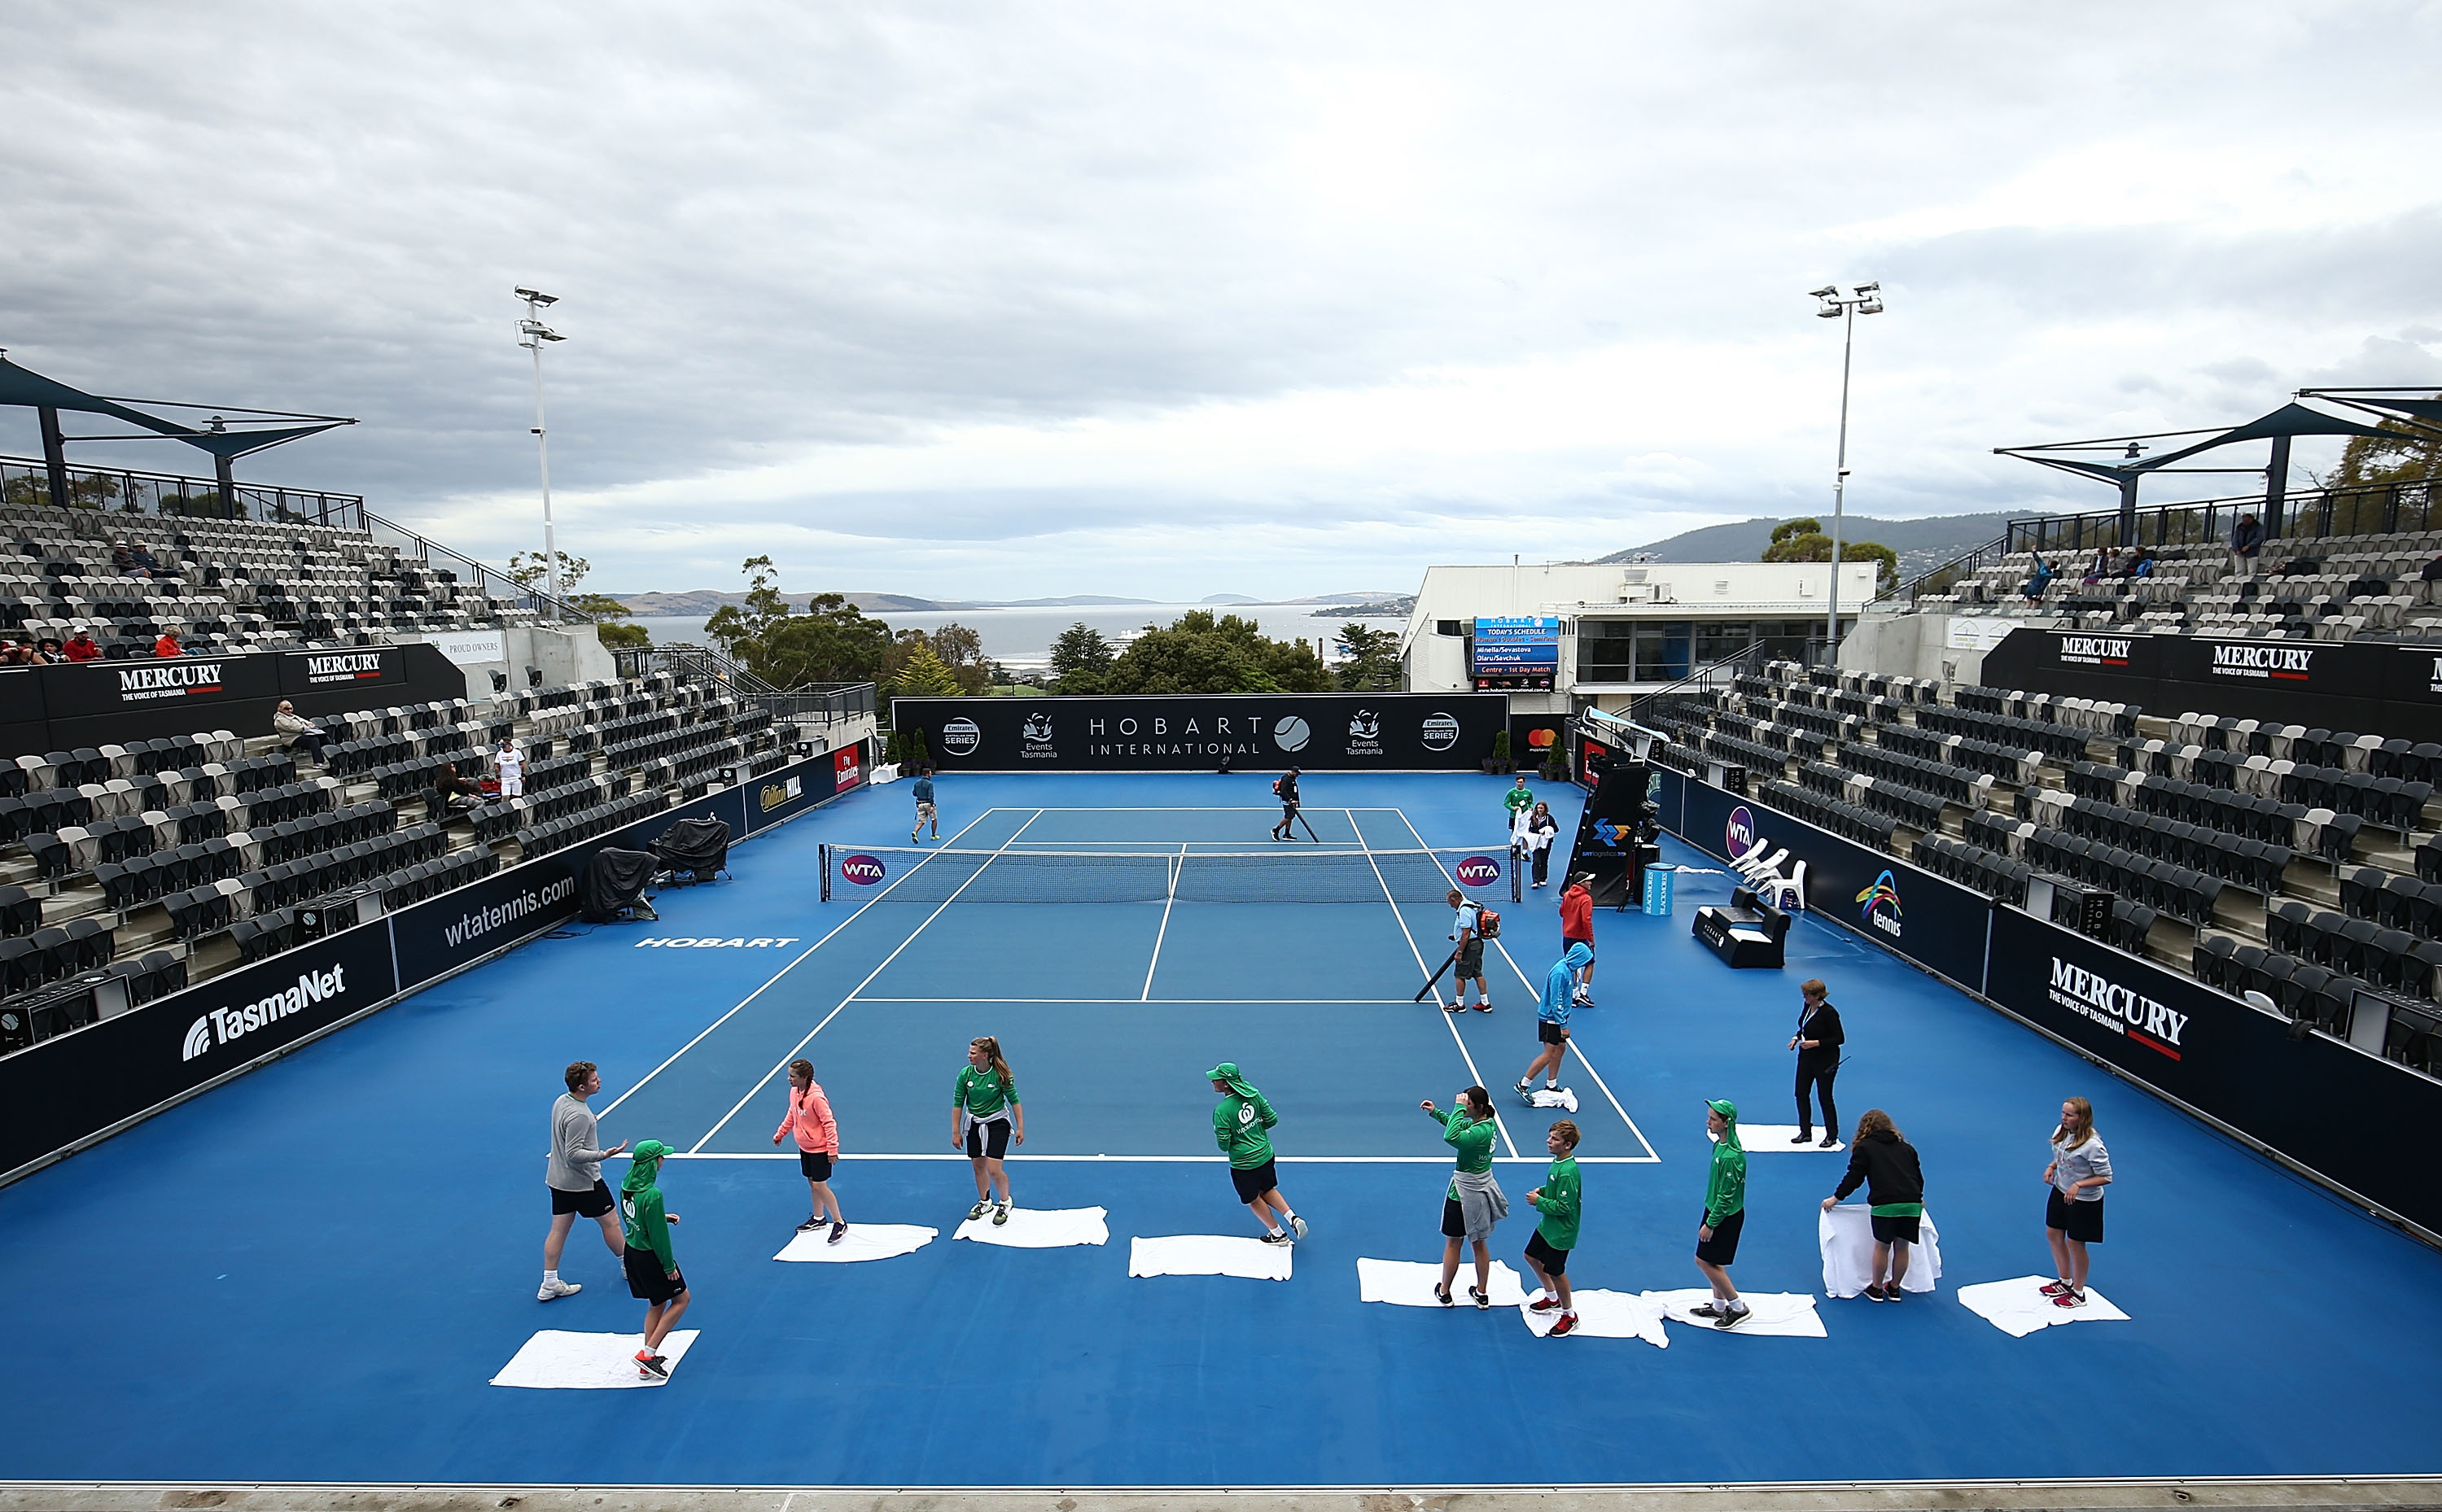 RAINY START: It was all hands on deck to dry the courts after a rain delay affected the start of semifinal day; Getty Images